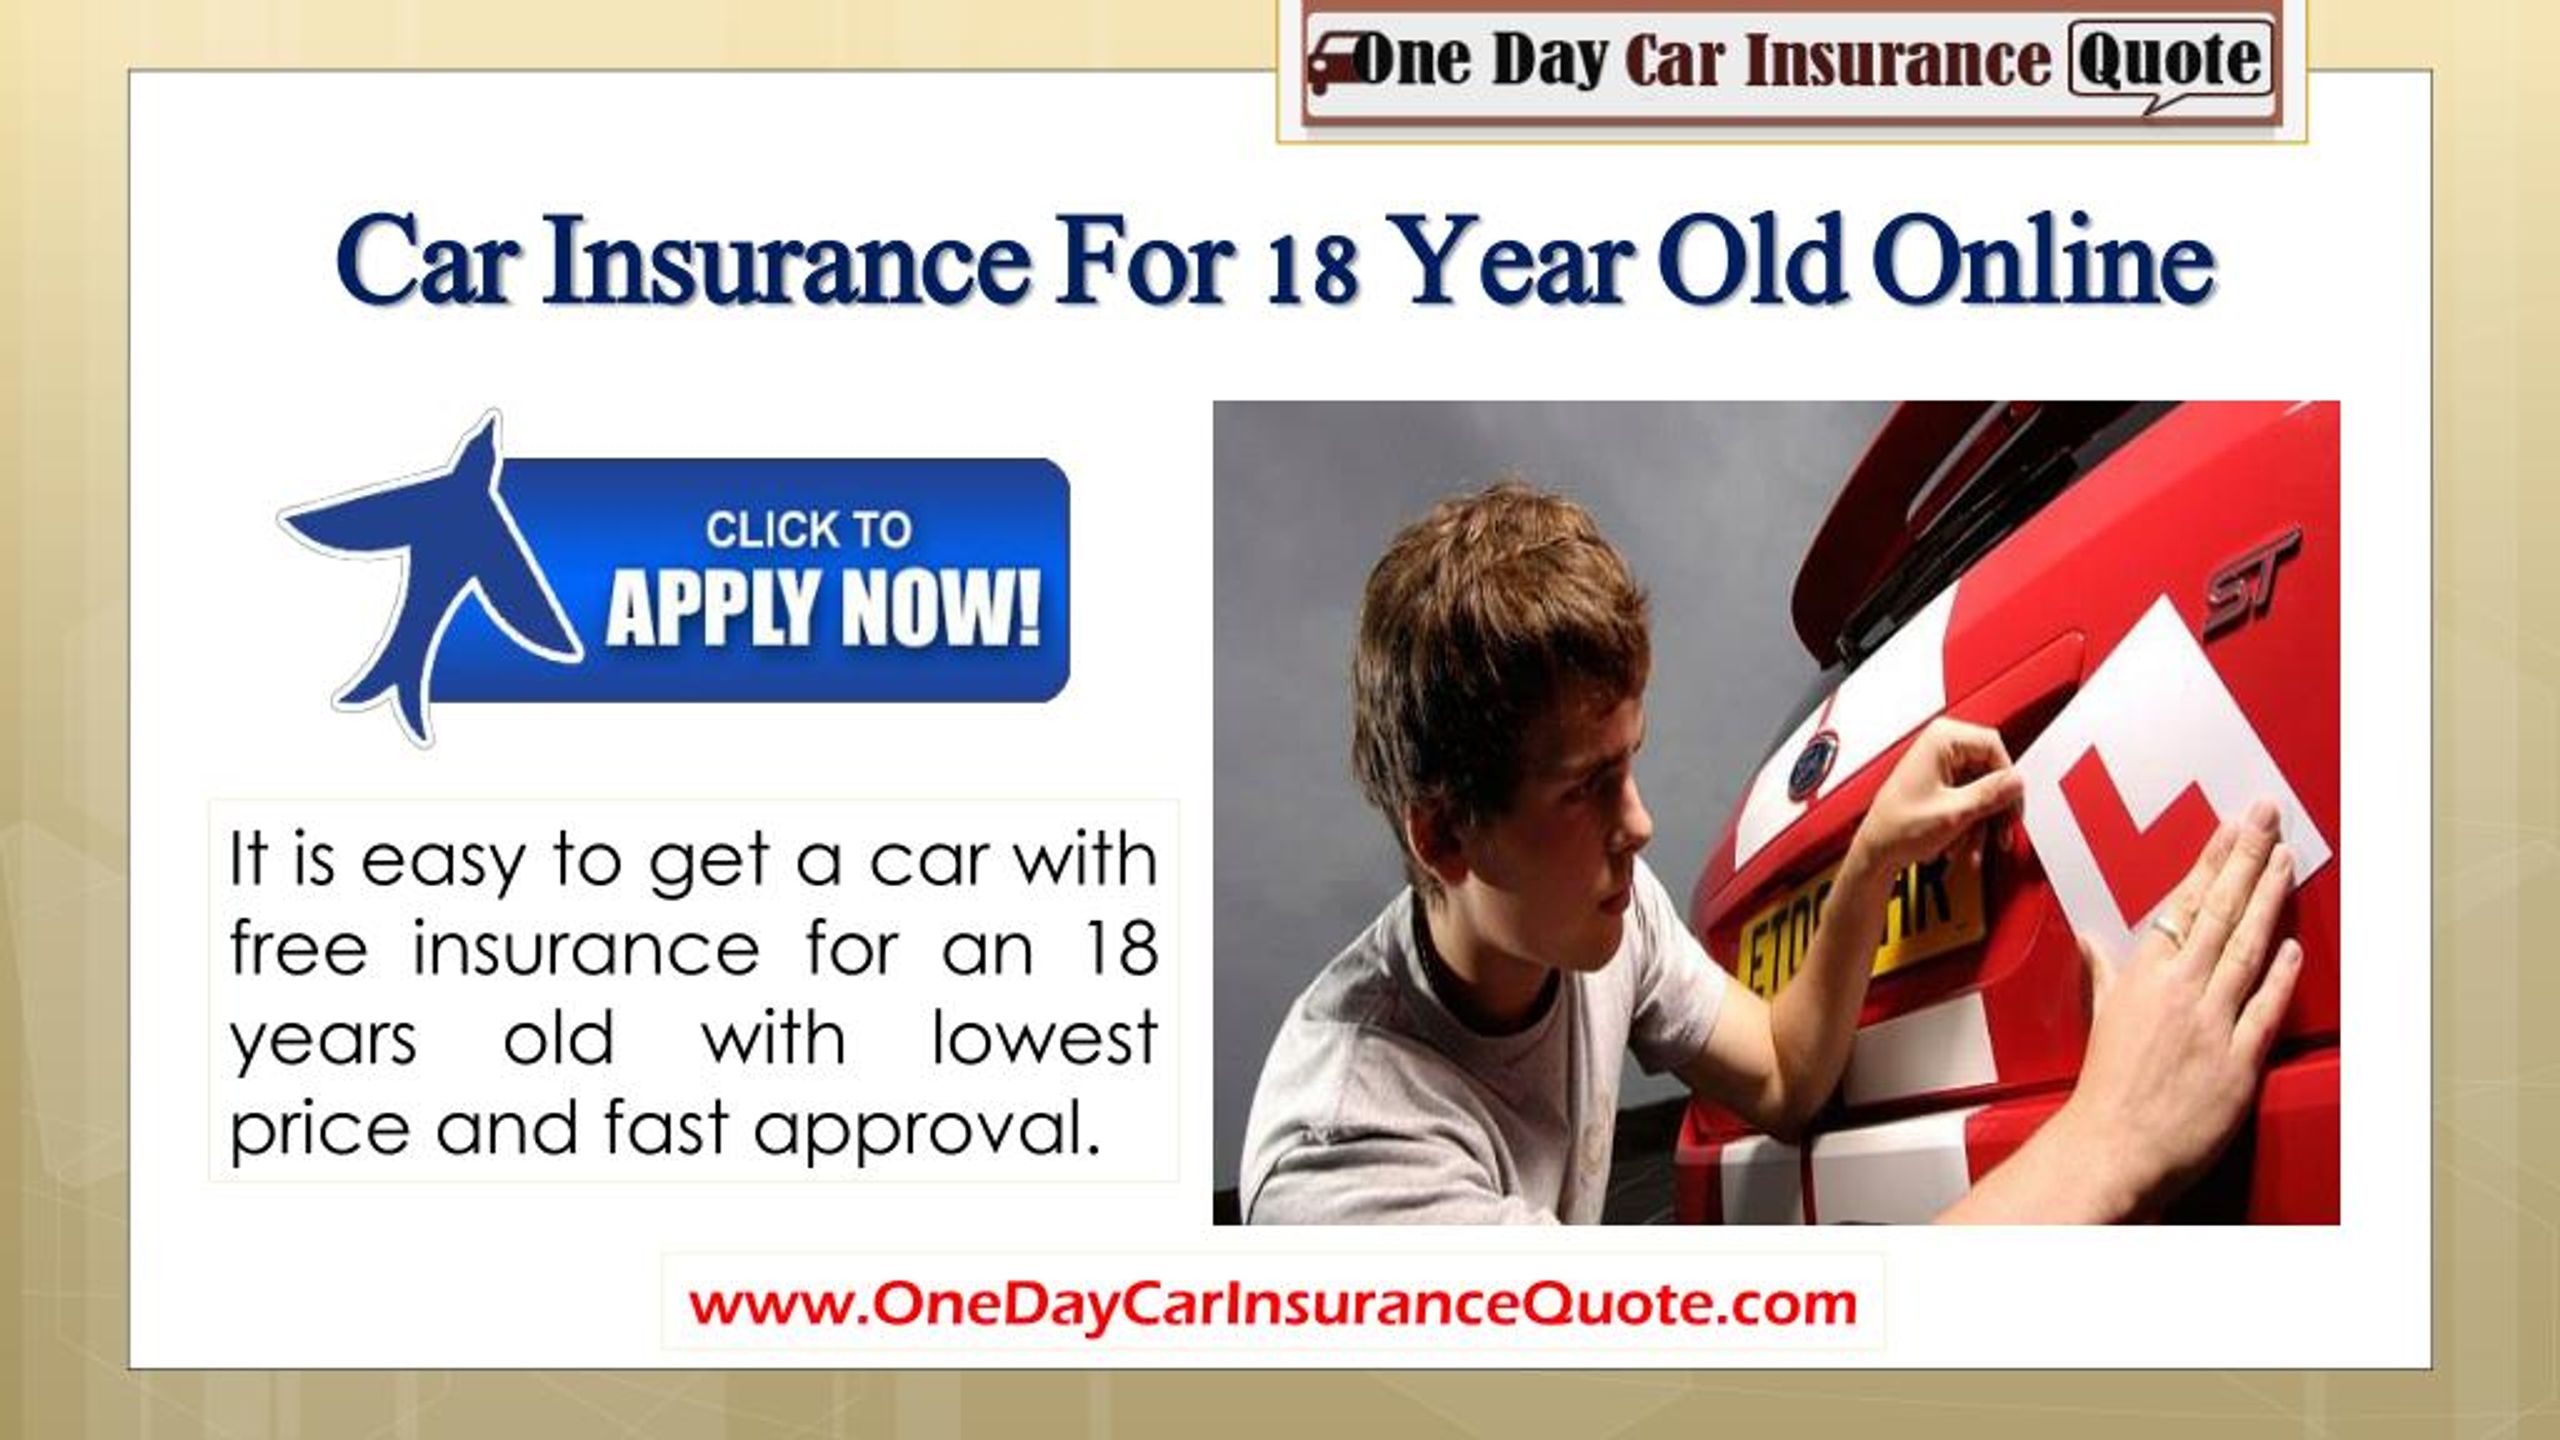 Cheap Temporary Car Insurance For 18 Year Olds